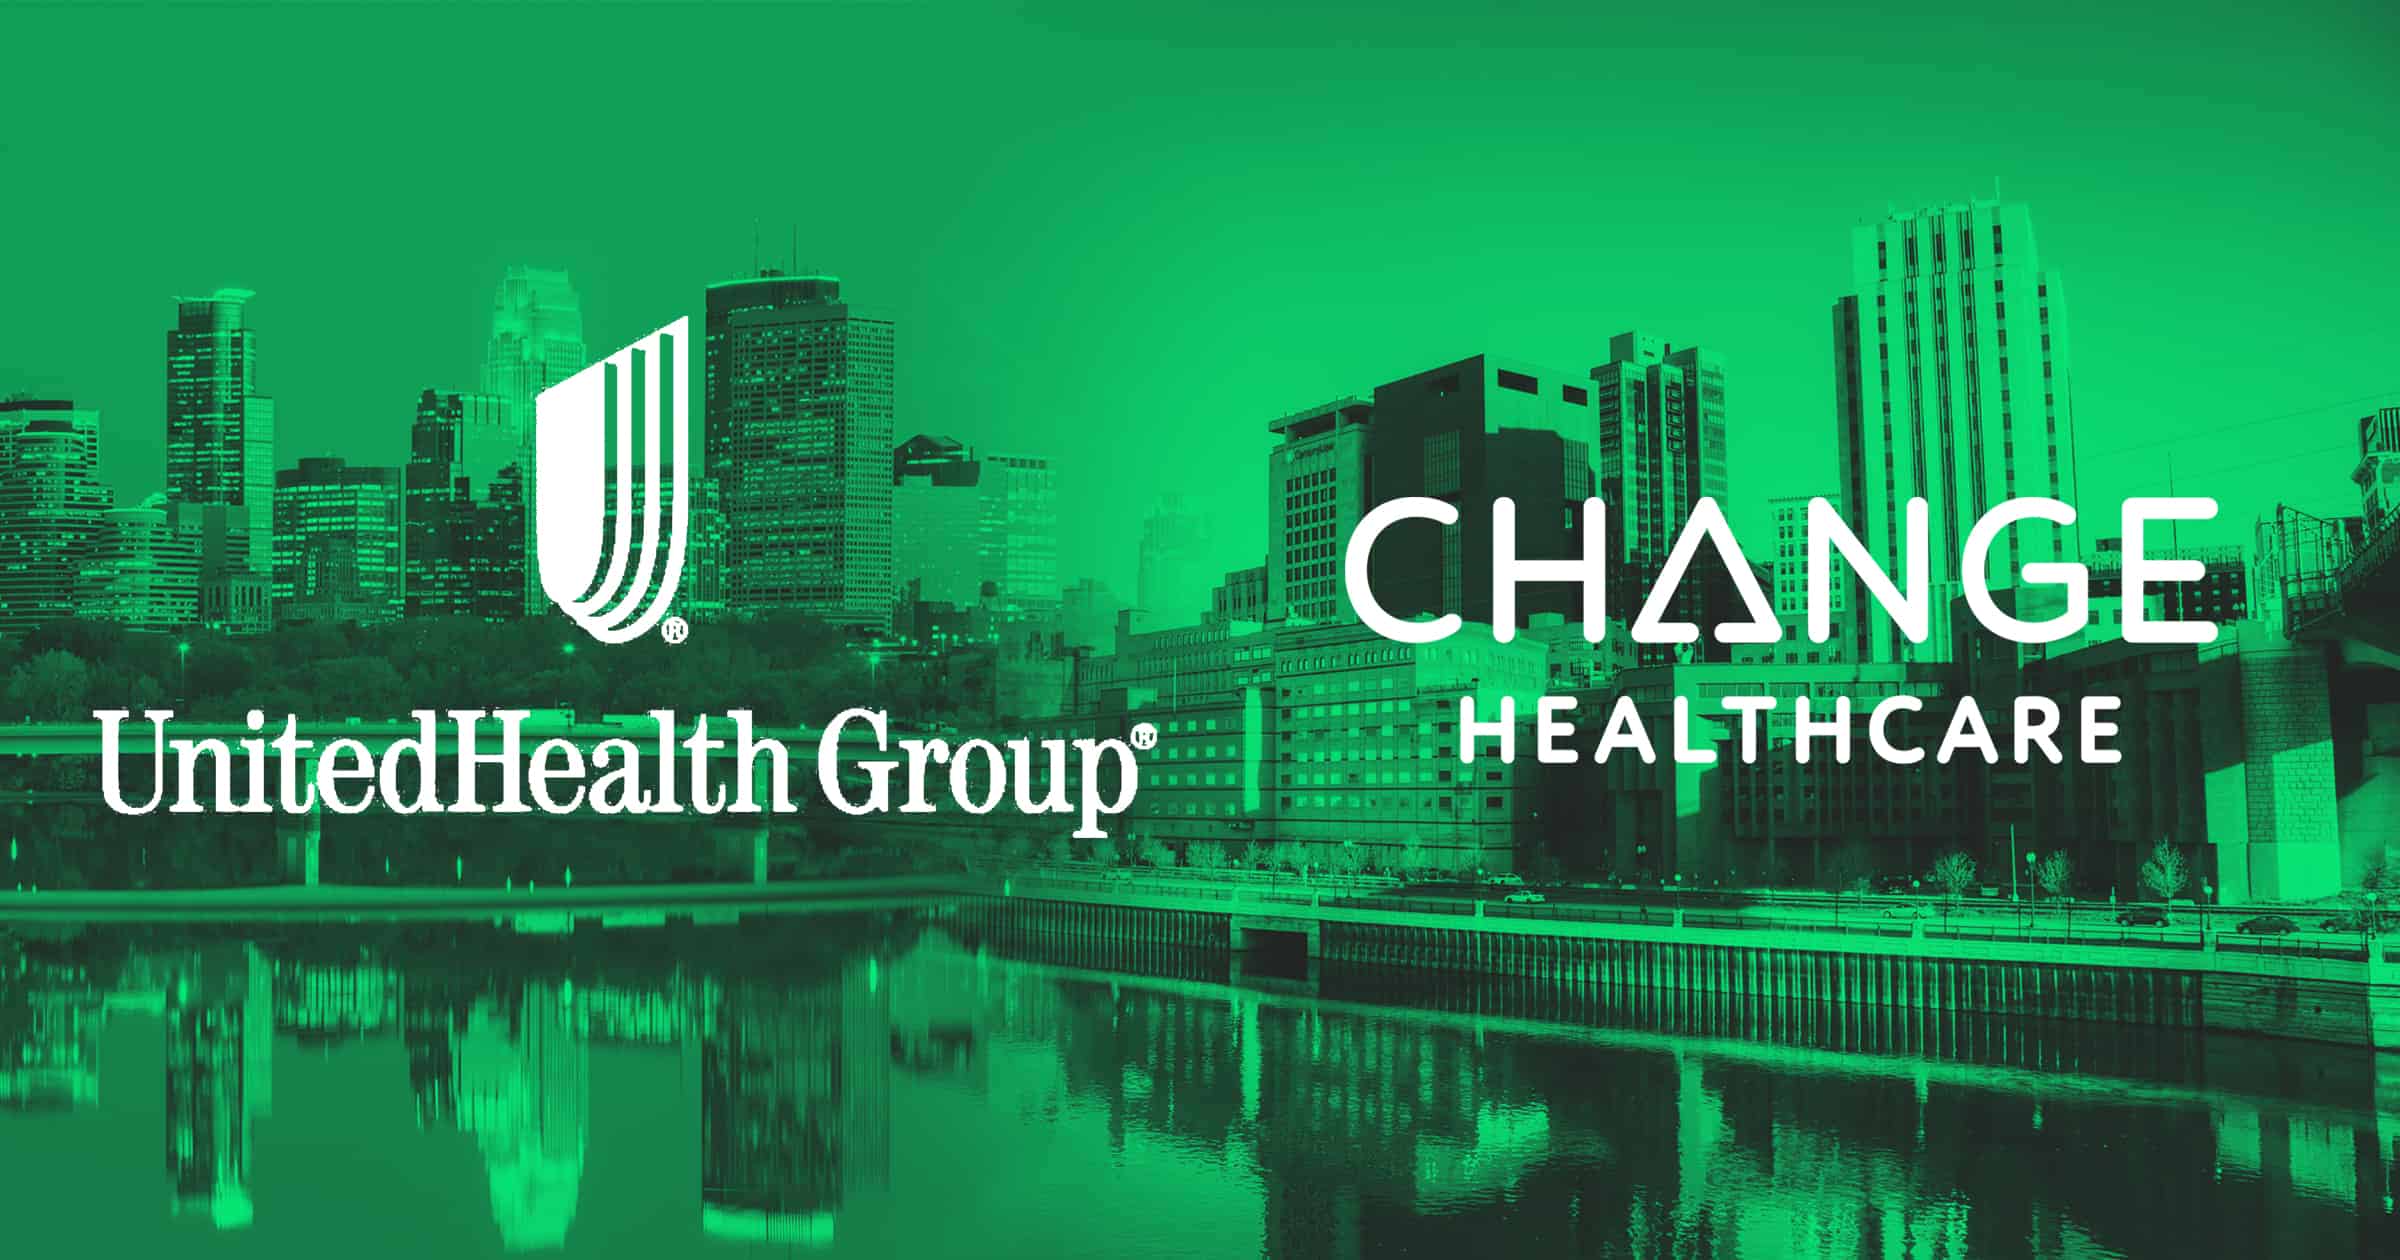 Change healthcare acquired by chief of staff change healthcare